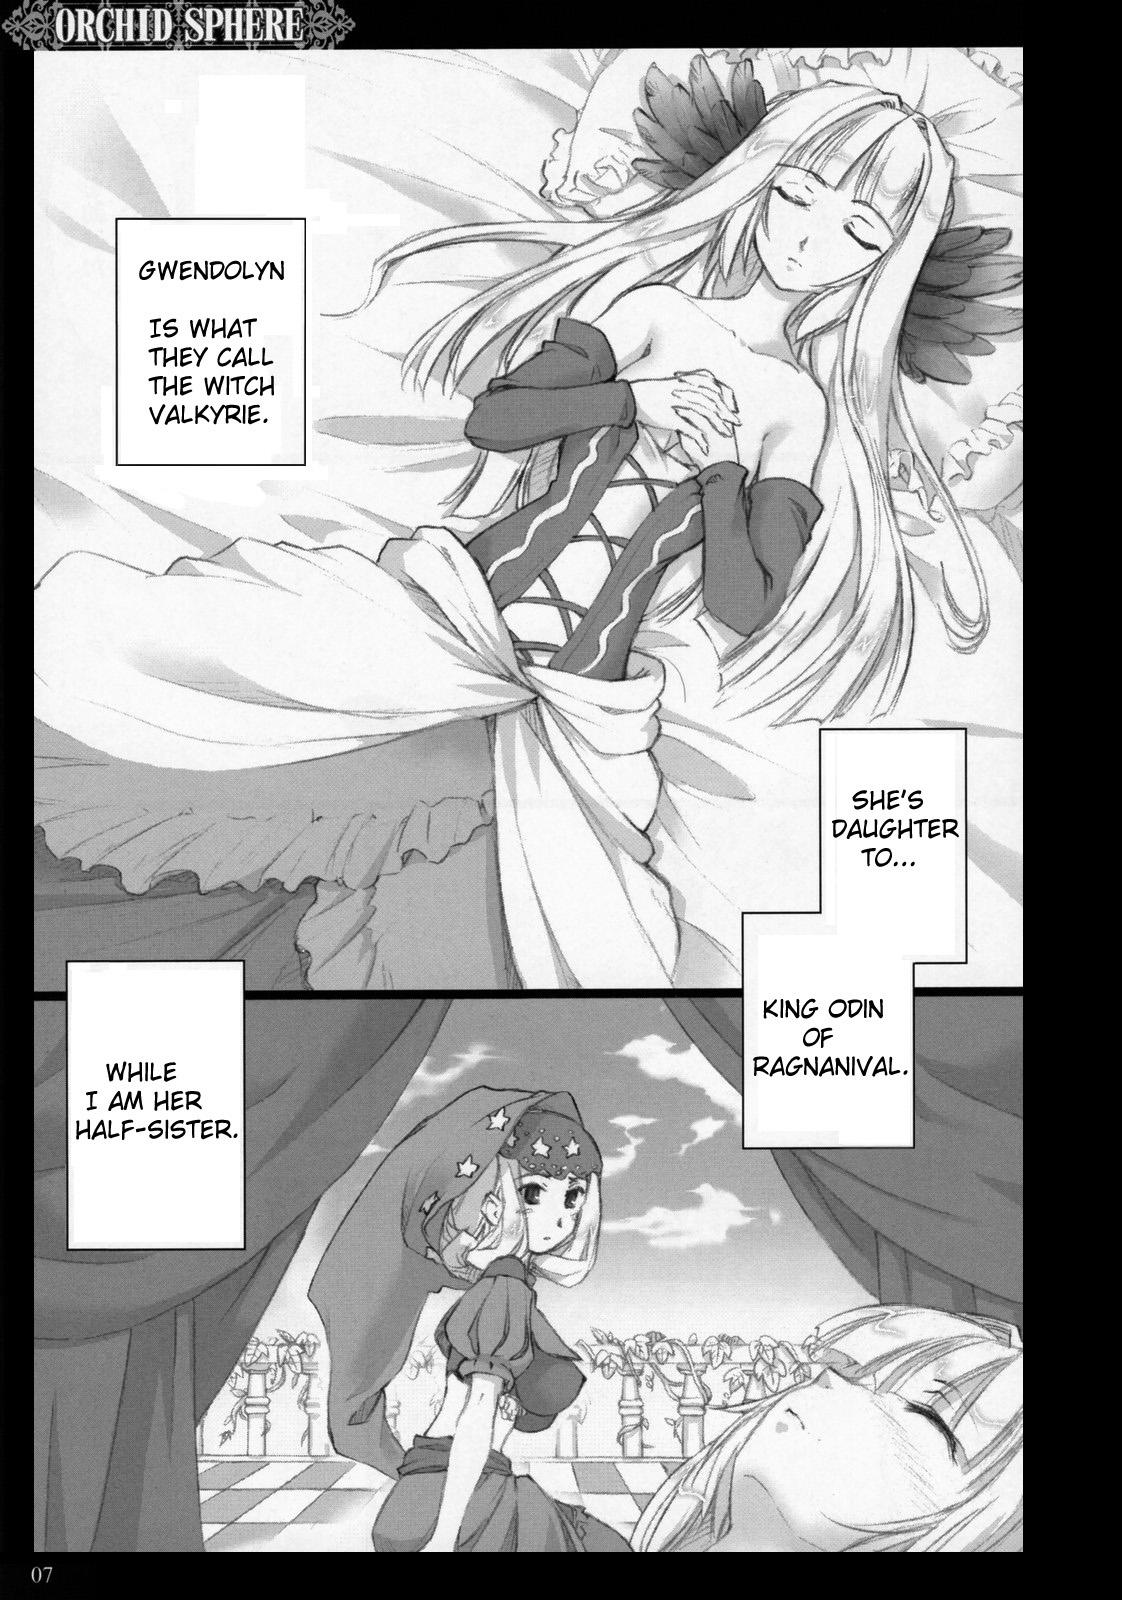 Vip Orchid Sphere - Odin sphere Prostitute - Page 6